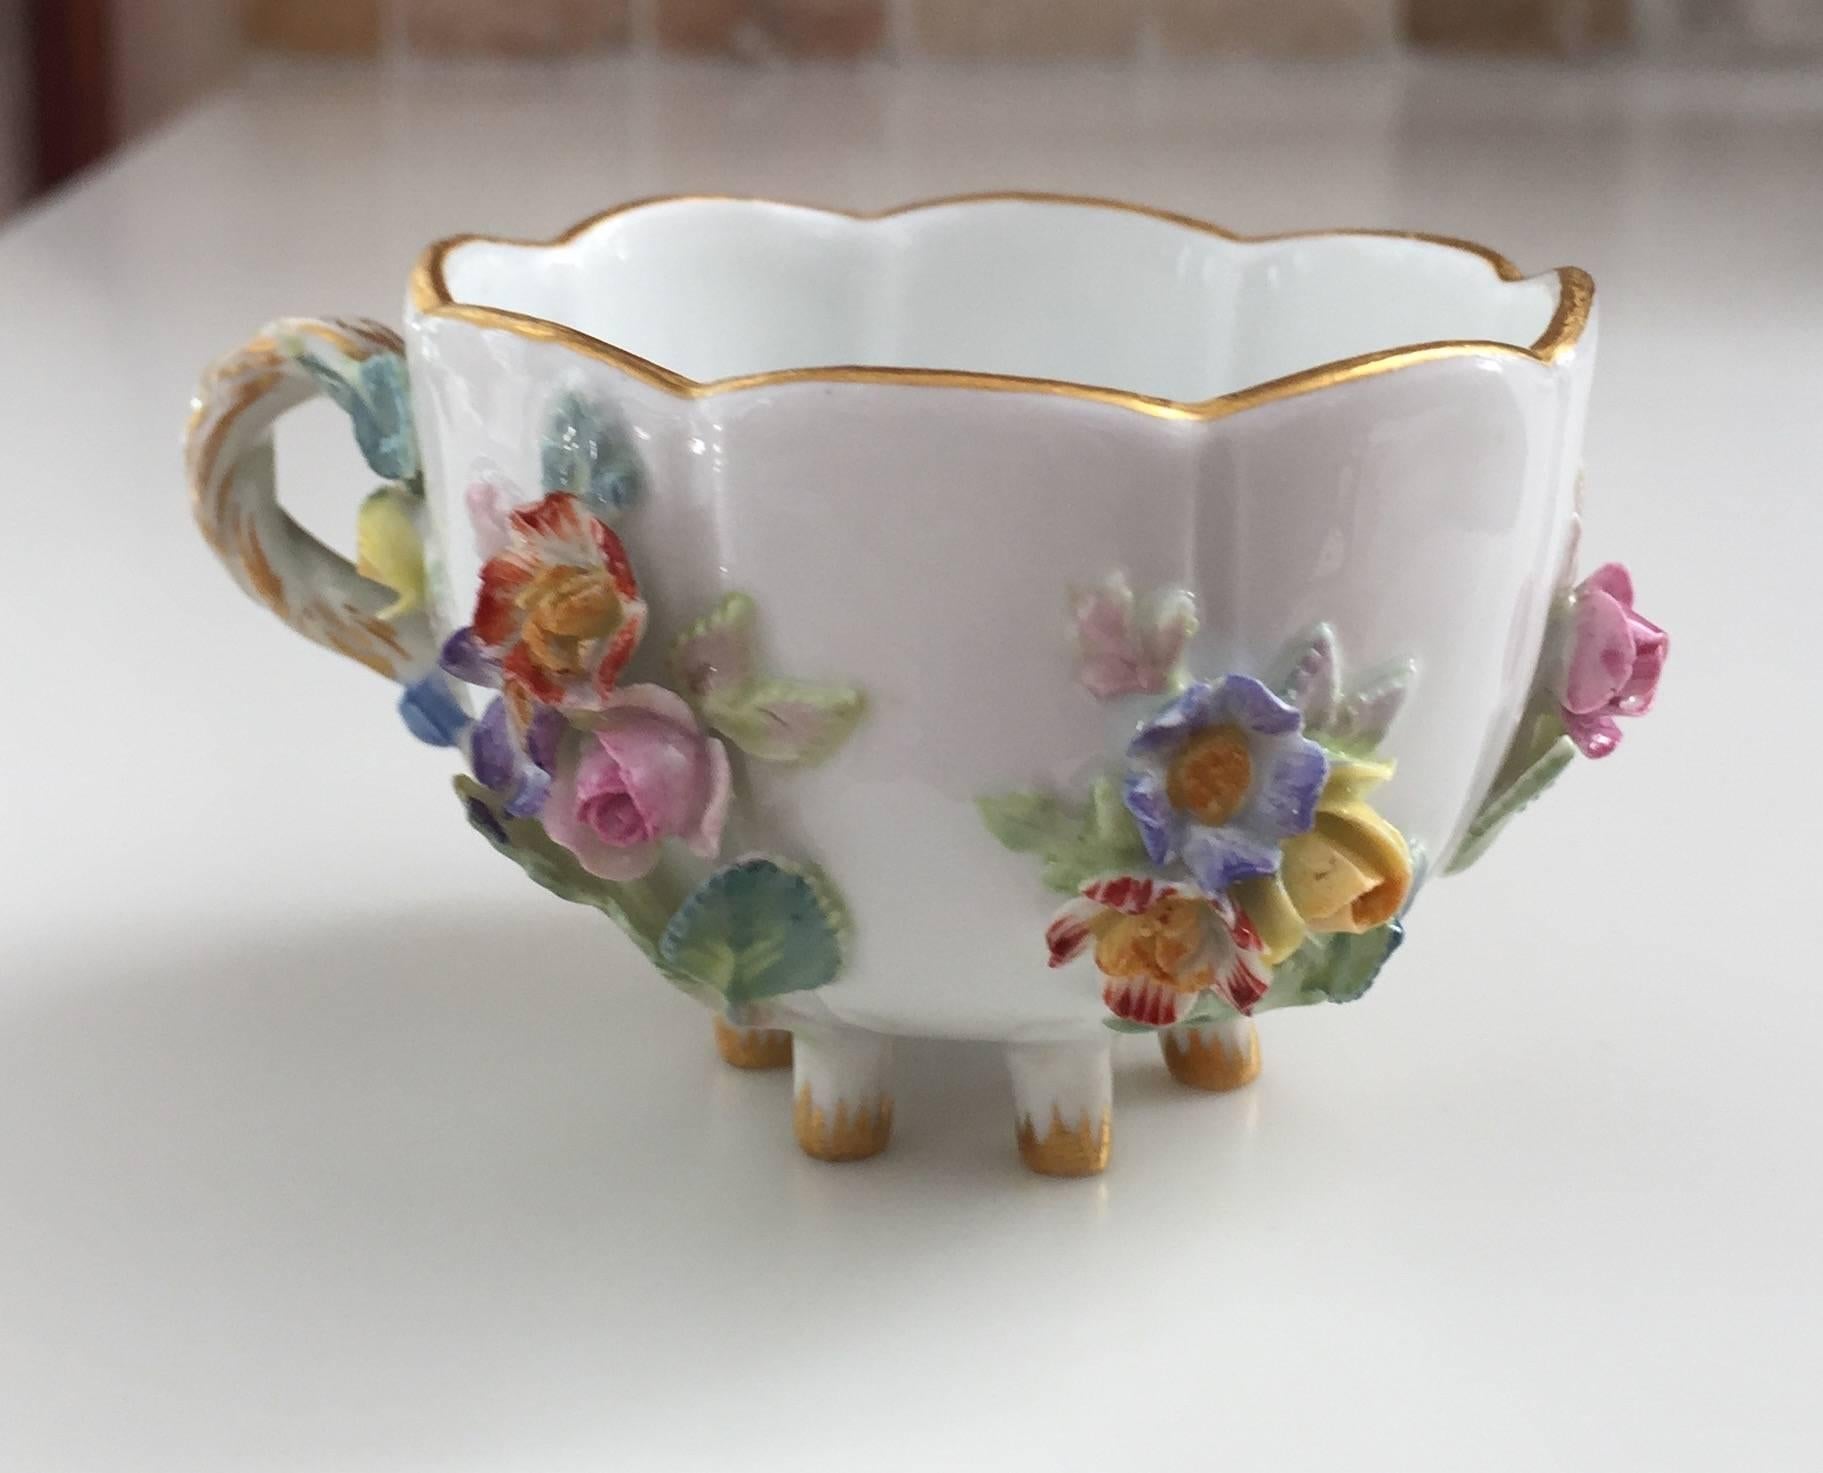 19th century Meissen cup and saucer
Floral with gold gilt accent.